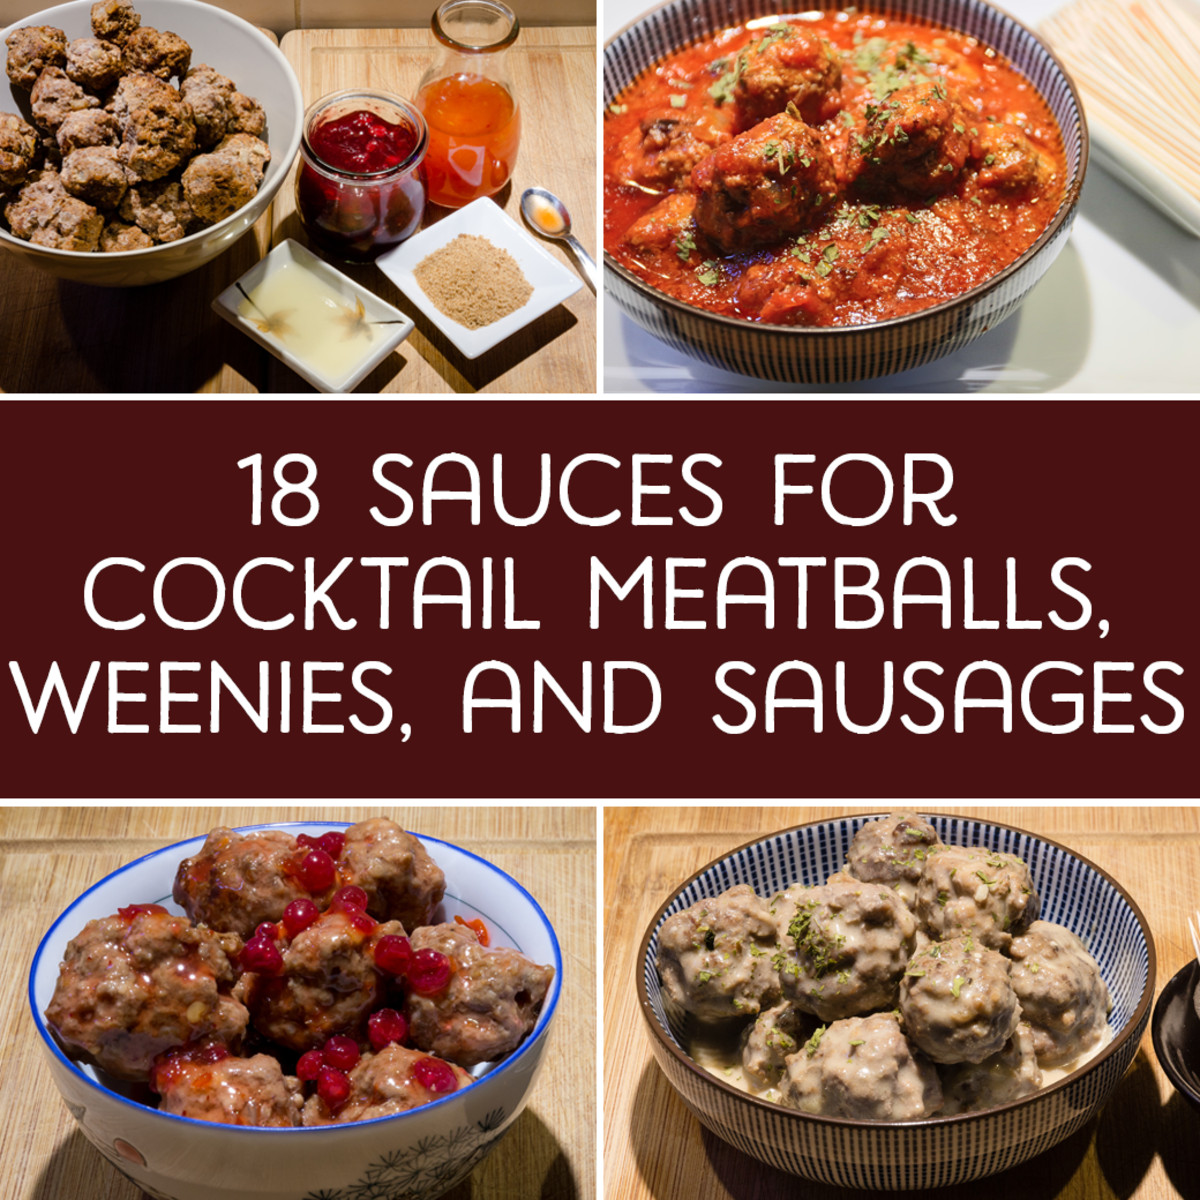 Sauces For Appetizer Meatballs
 18 Sauces for Cocktail Meatballs Weenies and Sausages